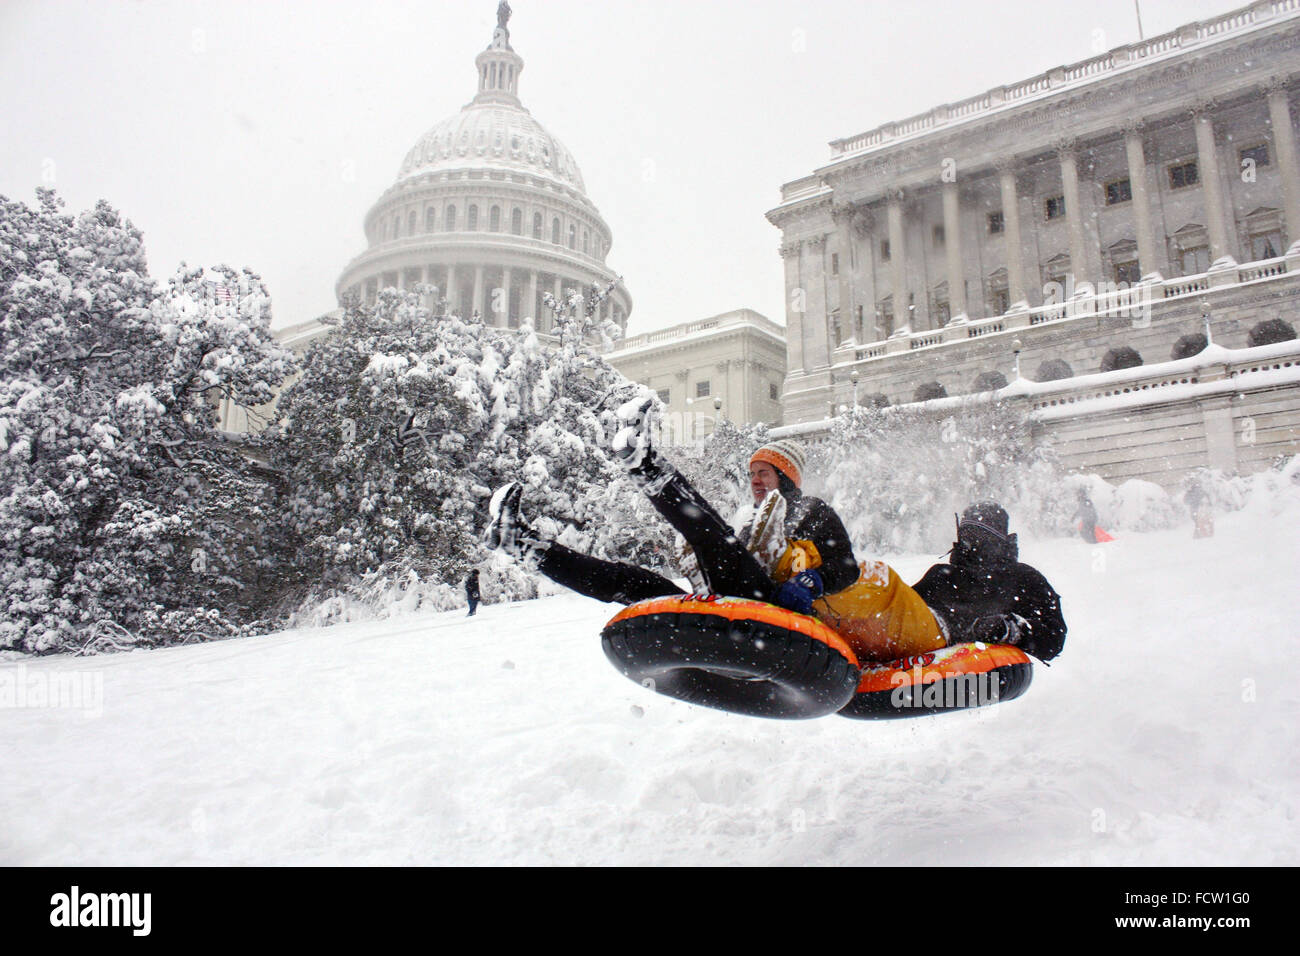 Residents take advantage a snowstorm to ride snow sleds down the slope on Capitol Hill February 6, 2010 in Washington, DC. Stock Photo